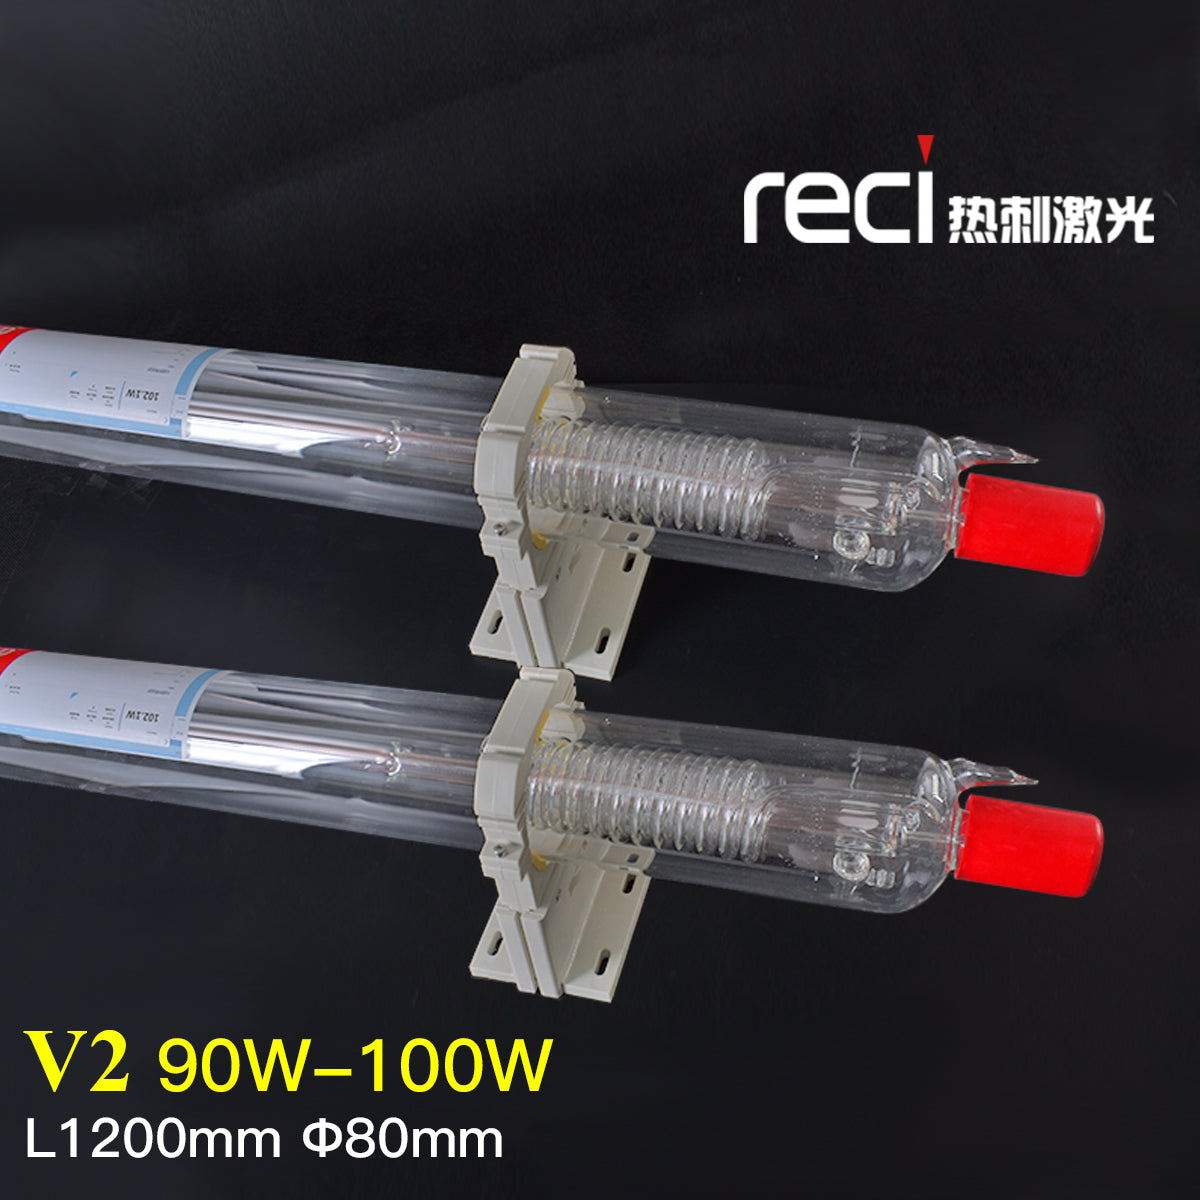 Reci CO2 Laser Tube V2 W2 T2 75W 1250mm Pipe Special For CO2 Laser Engraving Maring Carving Equipment Lamp Laser Machine Parts